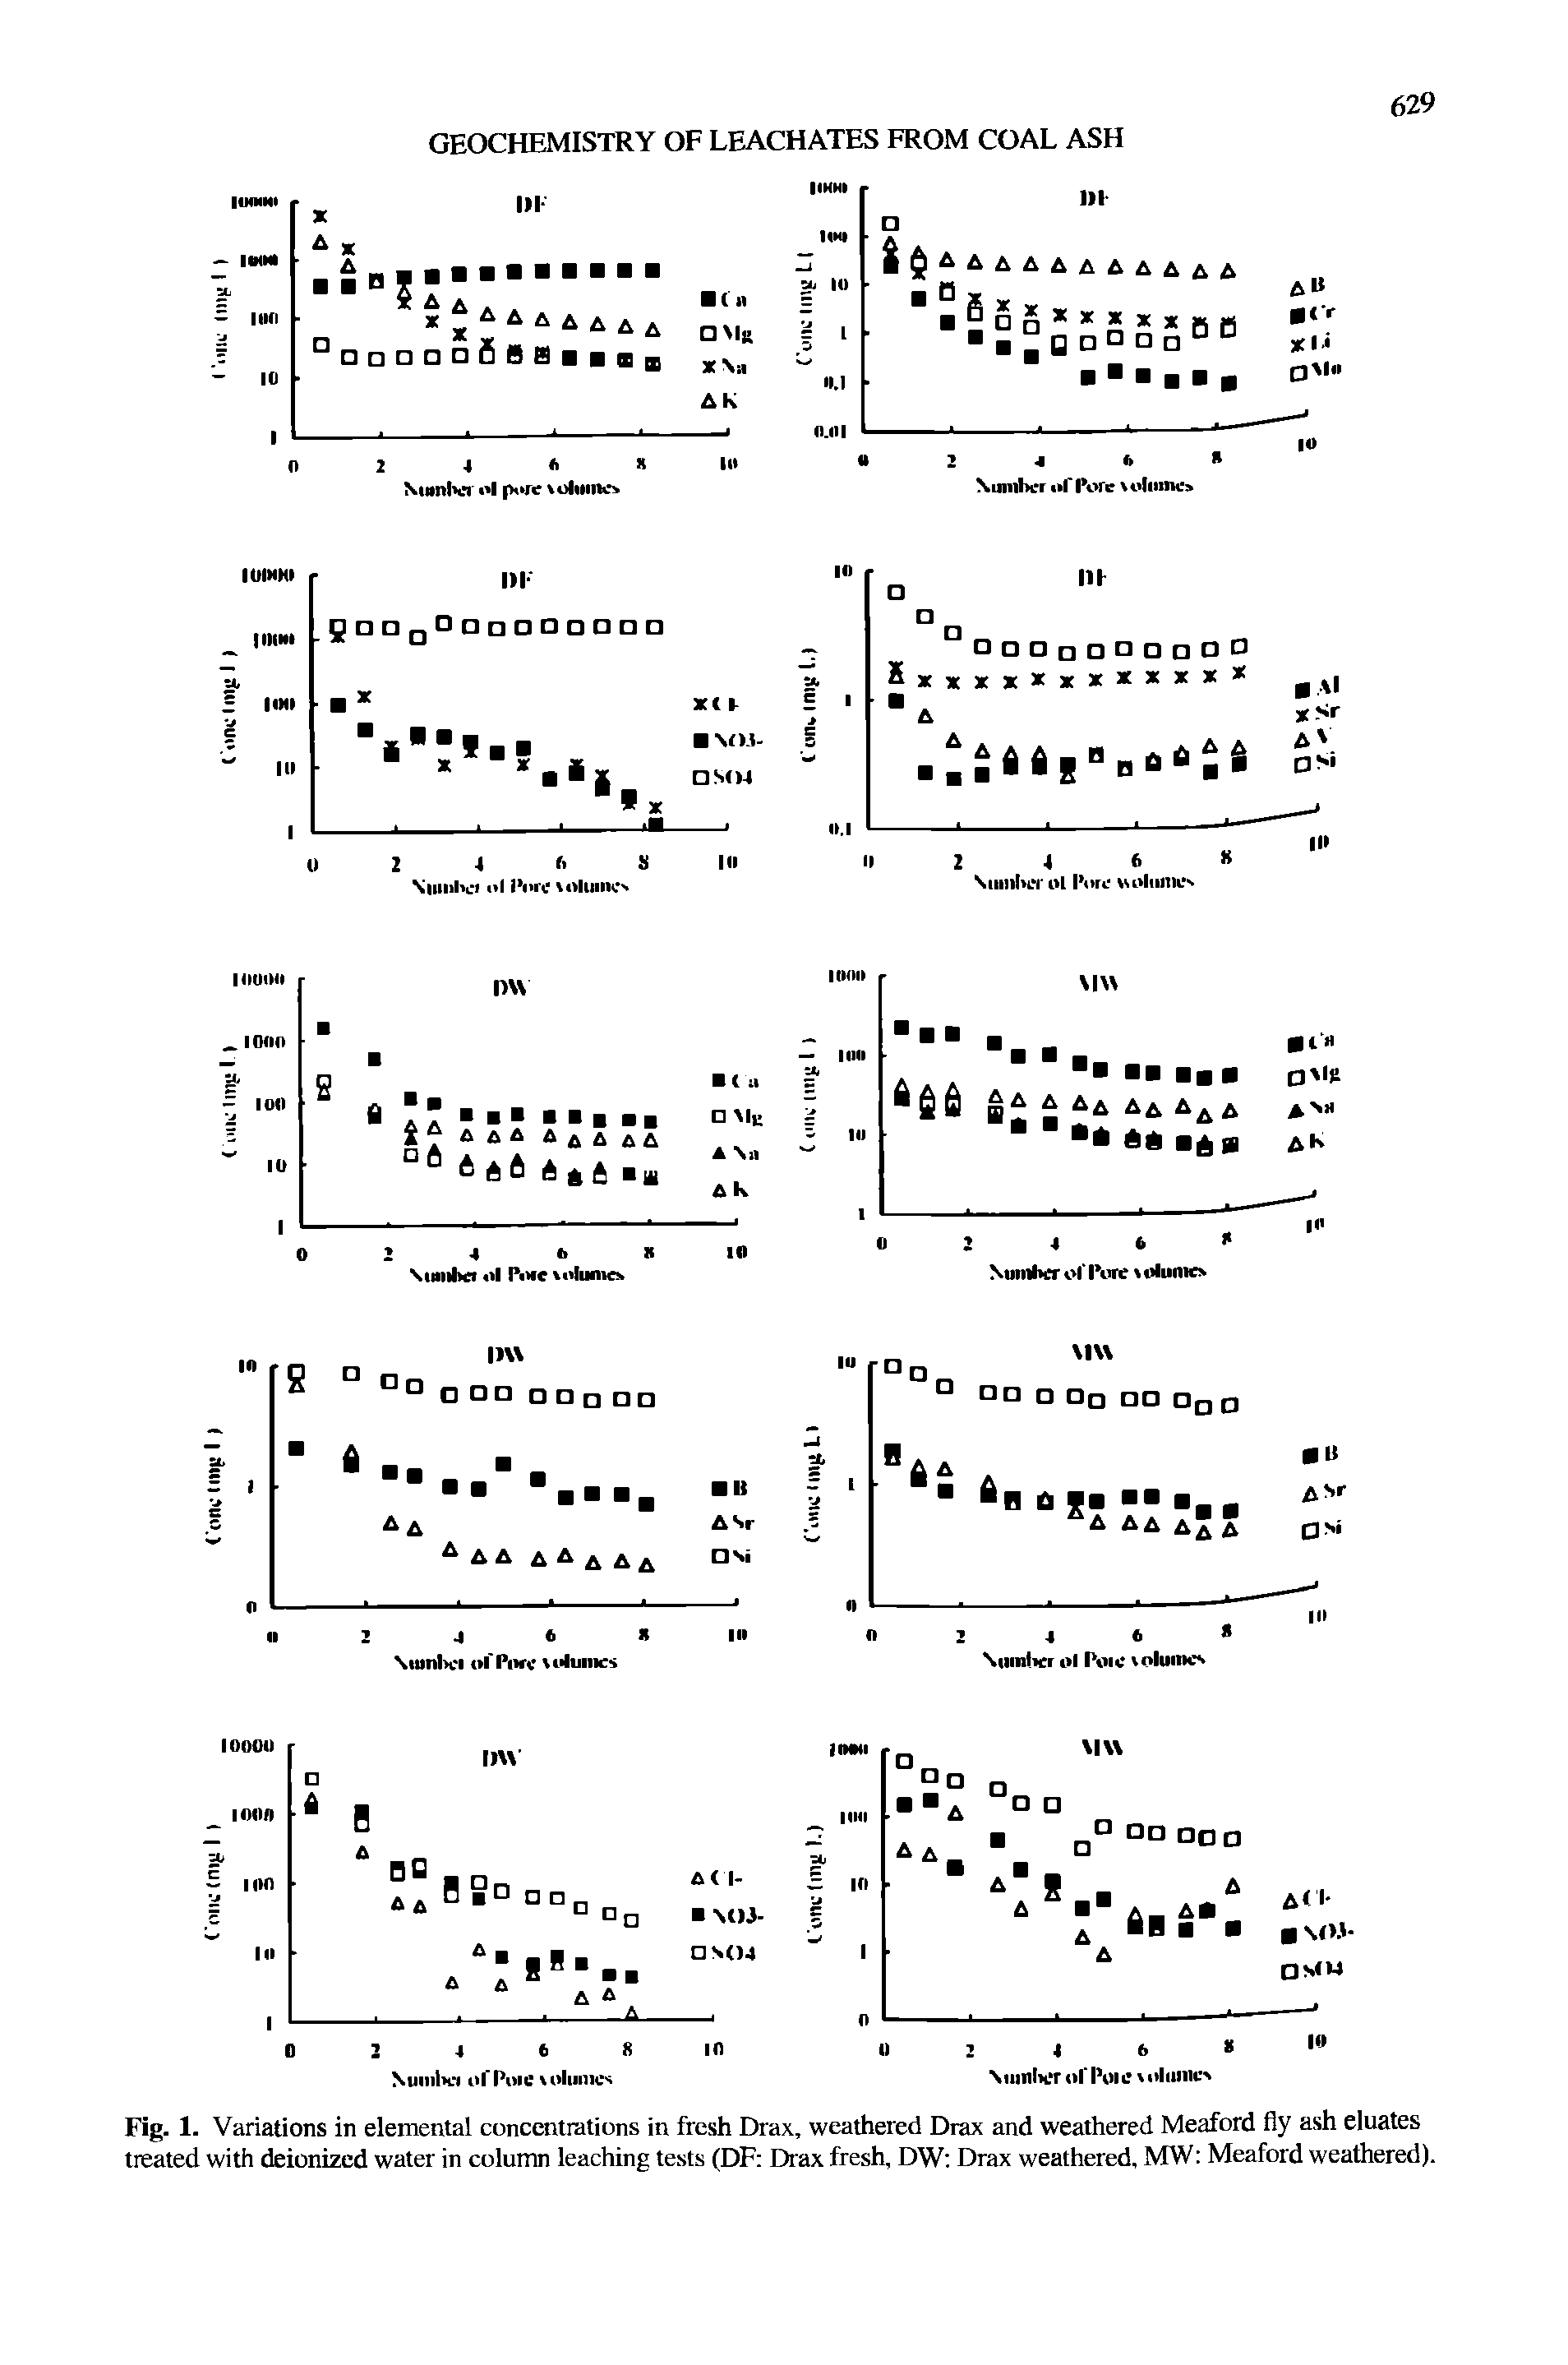 Fig. 1. Variations in elemental concentrations in fresh Drax, weathered Drax and weathered Meaford fly ash eluates treated with deionized water in column leaching tests (DF Drax fresh, DW Drax weathered, MW Meaford weathered).